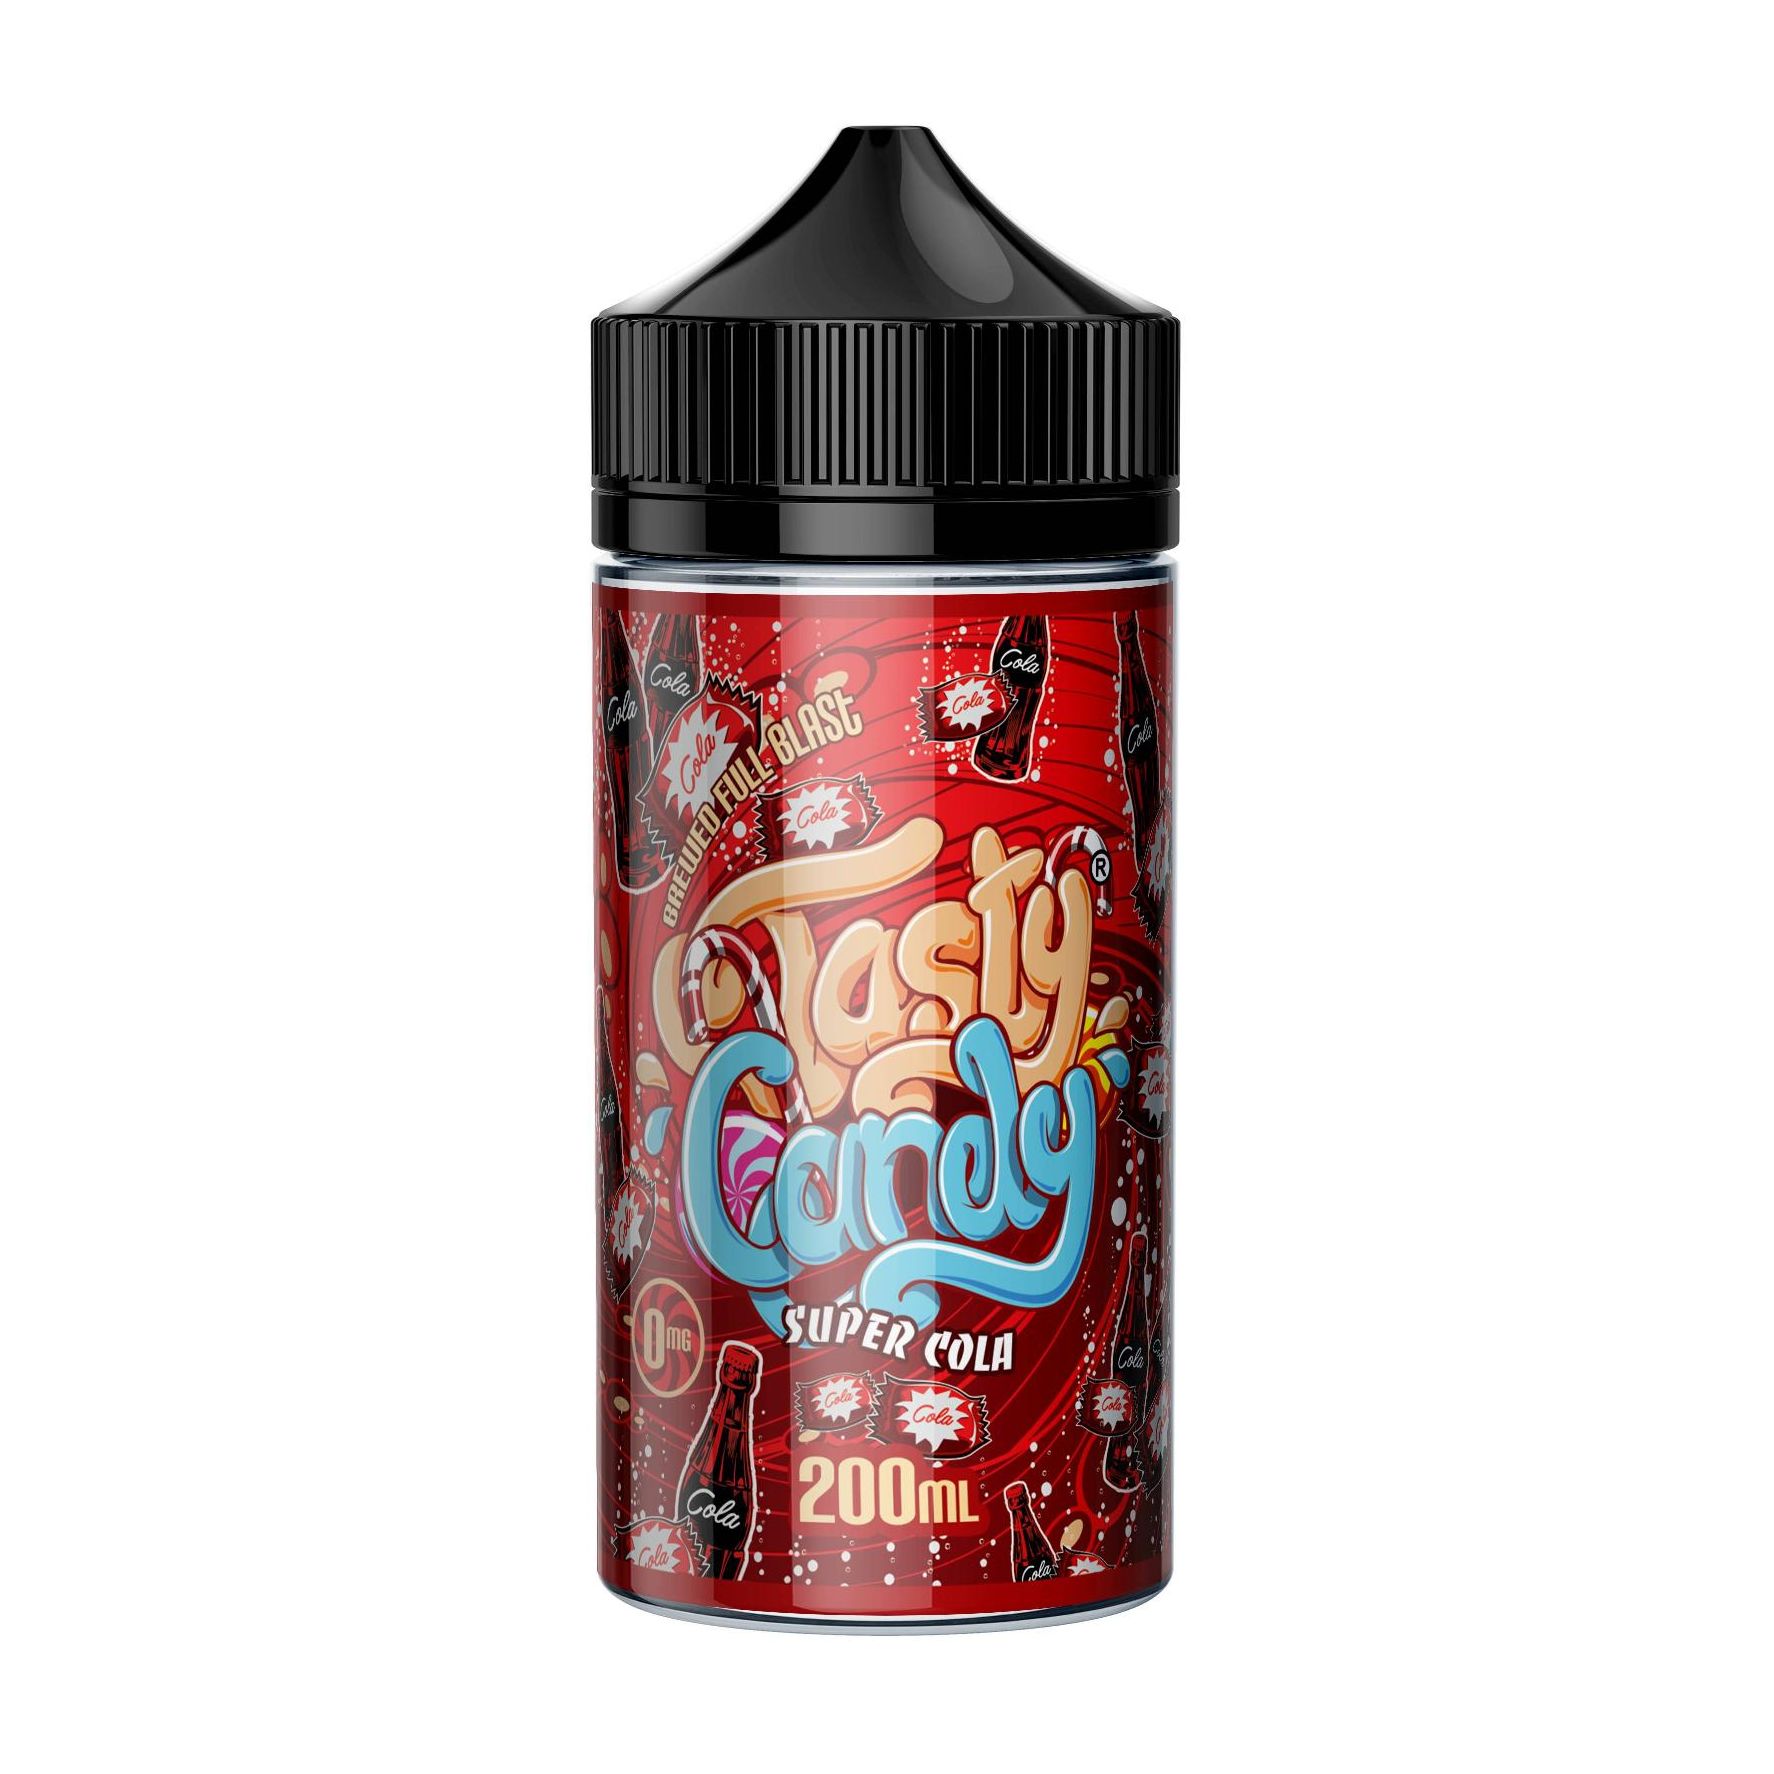 white Super Cola by Tasty Candy 200ml